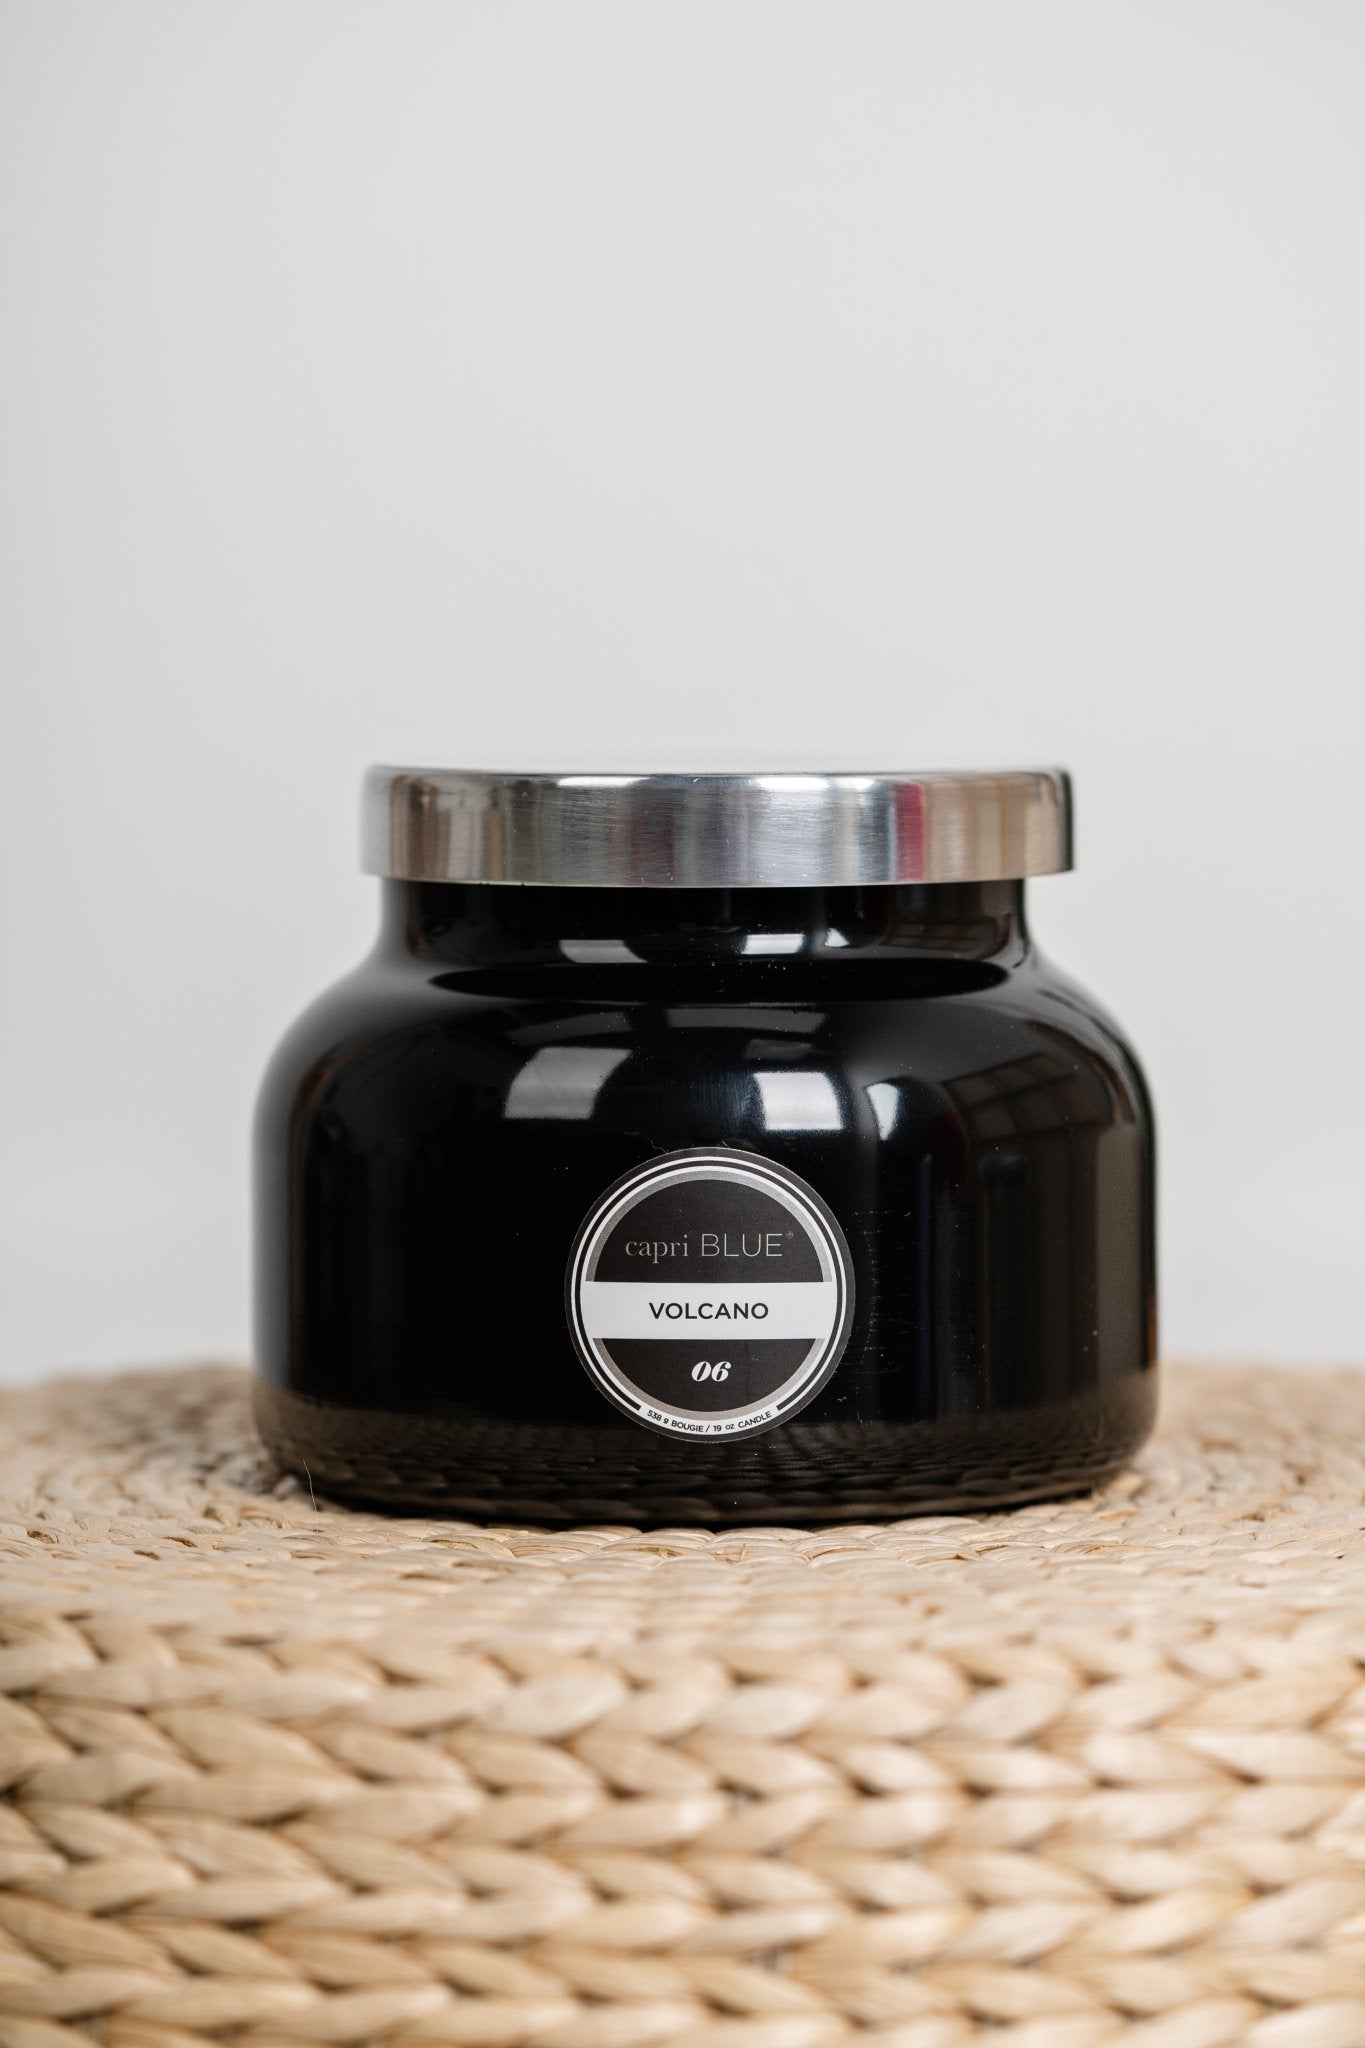 Capri Blue volcano scent 19 oz candle black - Trendy Candles and Scents at Lush Fashion Lounge Boutique in Oklahoma City